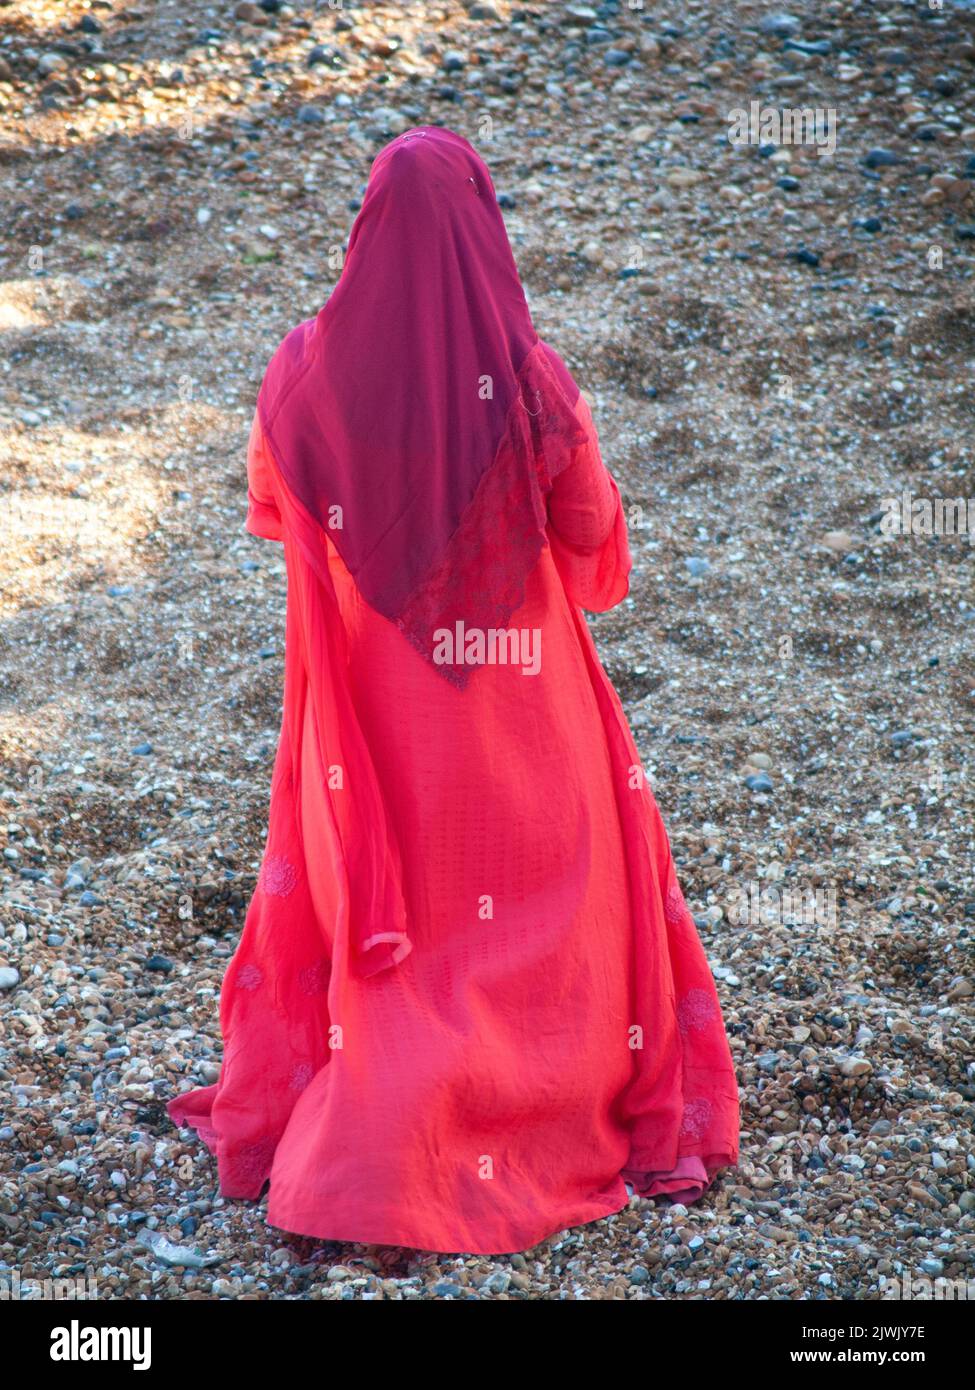 On the beach at Brighton a woman wears a bright red item of Islamic clothing Stock Photo